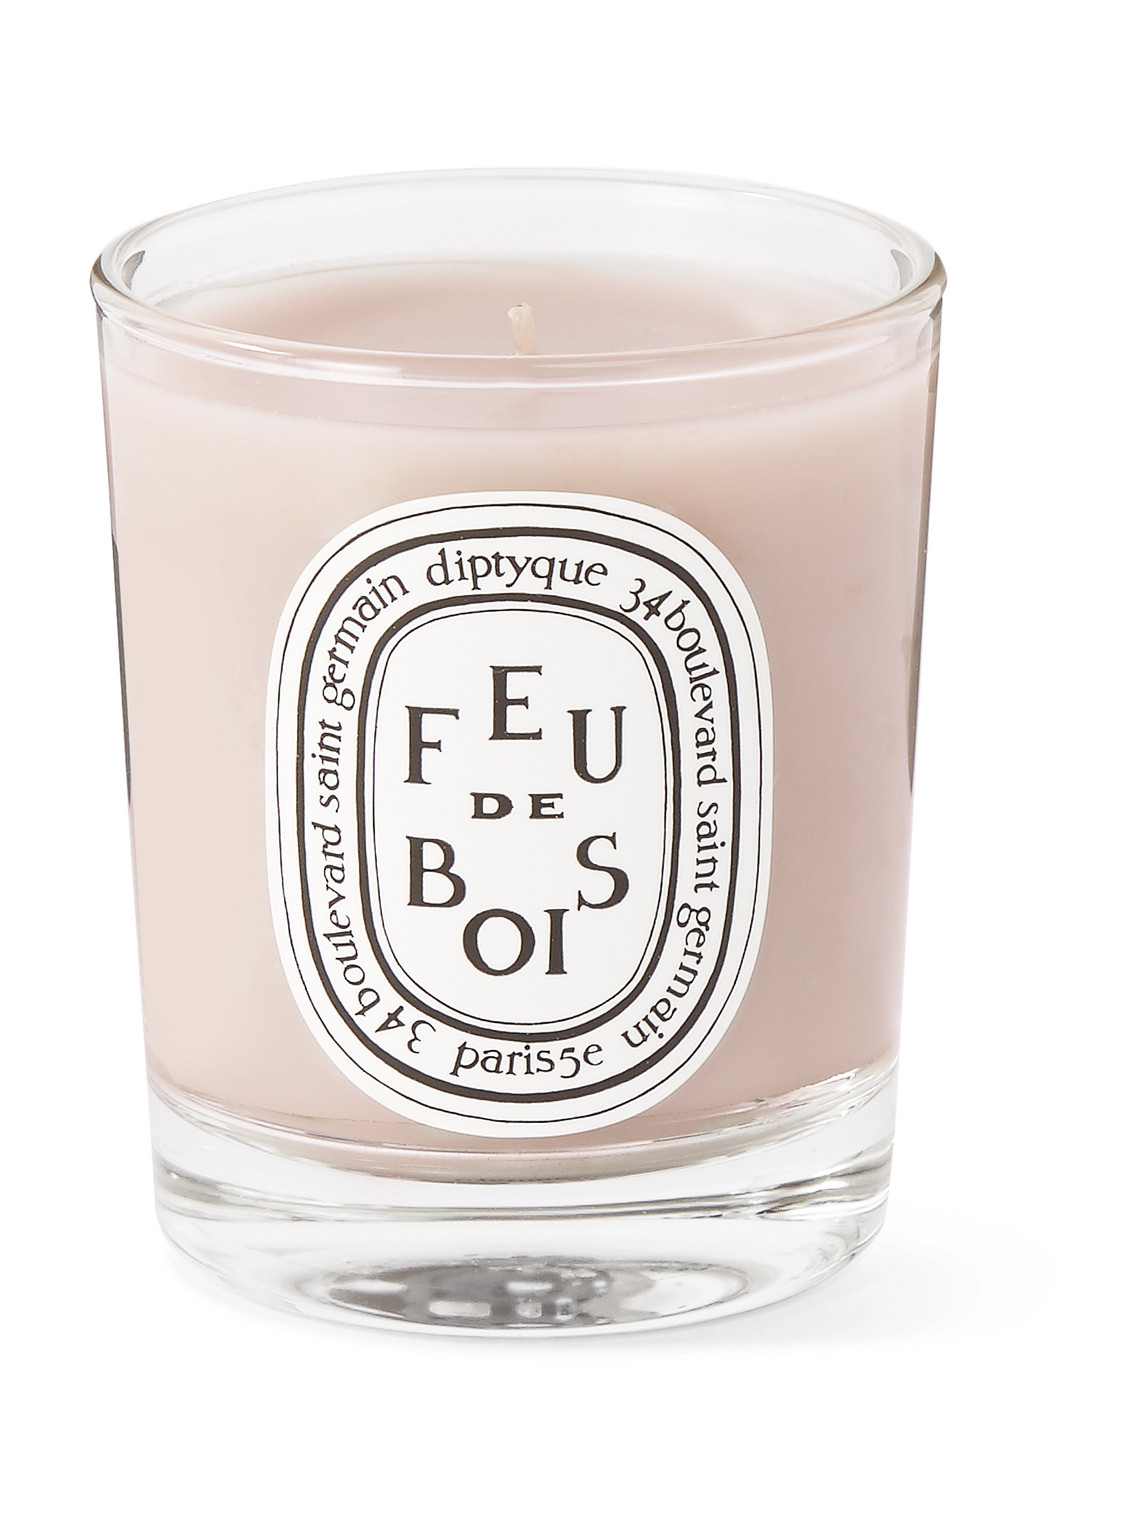 Diptyque Feu De Bois Scented Candle, 70g In Colorless